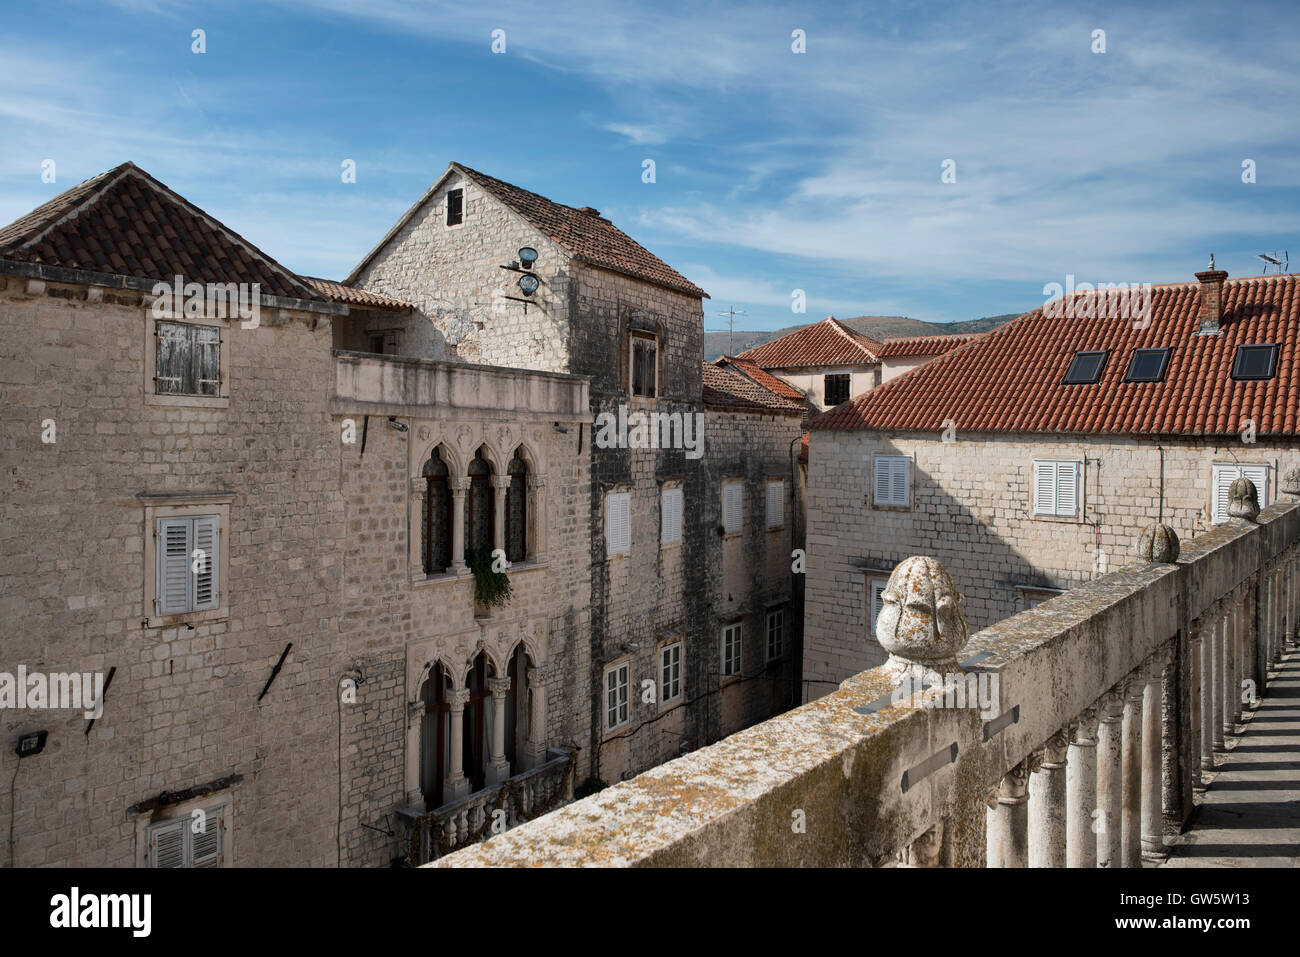 View on the facade of the Grand Cipiko Palace with its decorated Venetian Gothic three-light windows. Trogir, old town, Croatia. Stock Photo